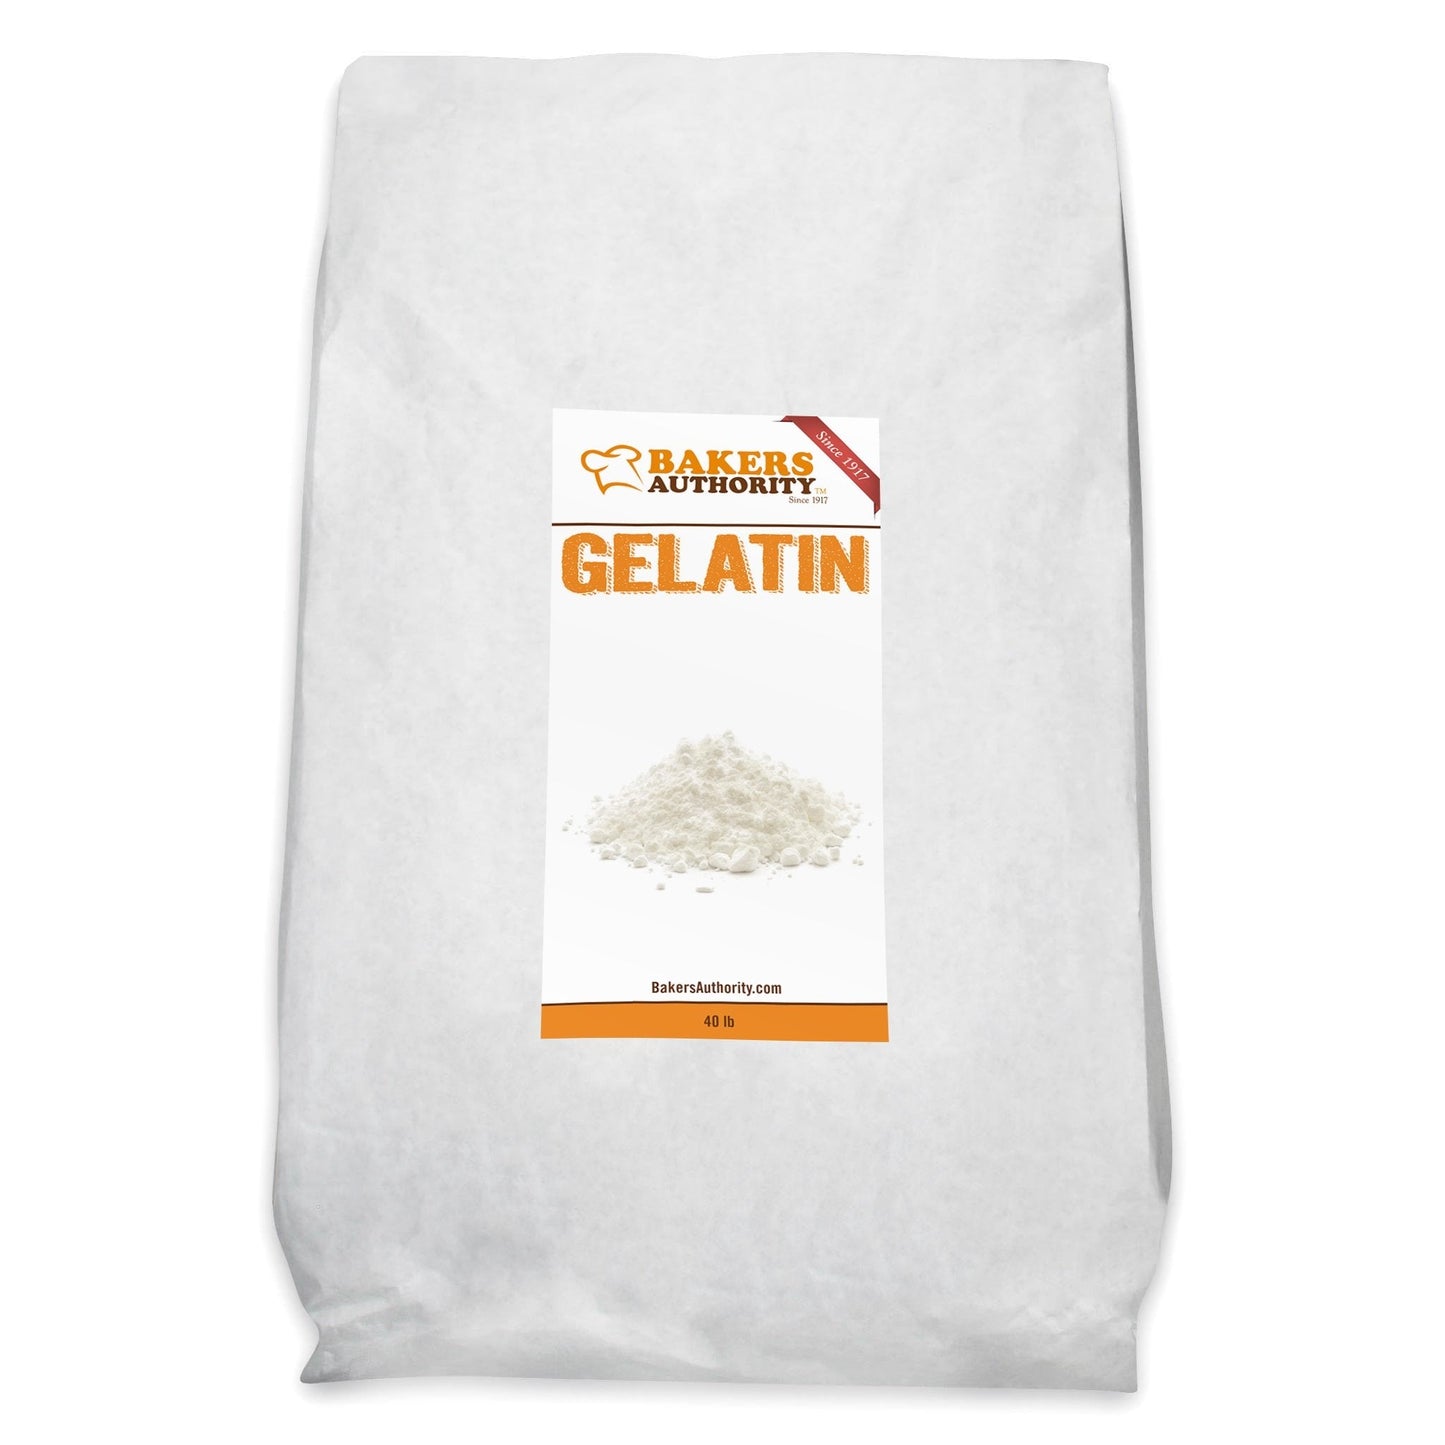 BOVINE GELATIN 225 BLOOM SPECIAL ORDER HAS A LEAD TIME